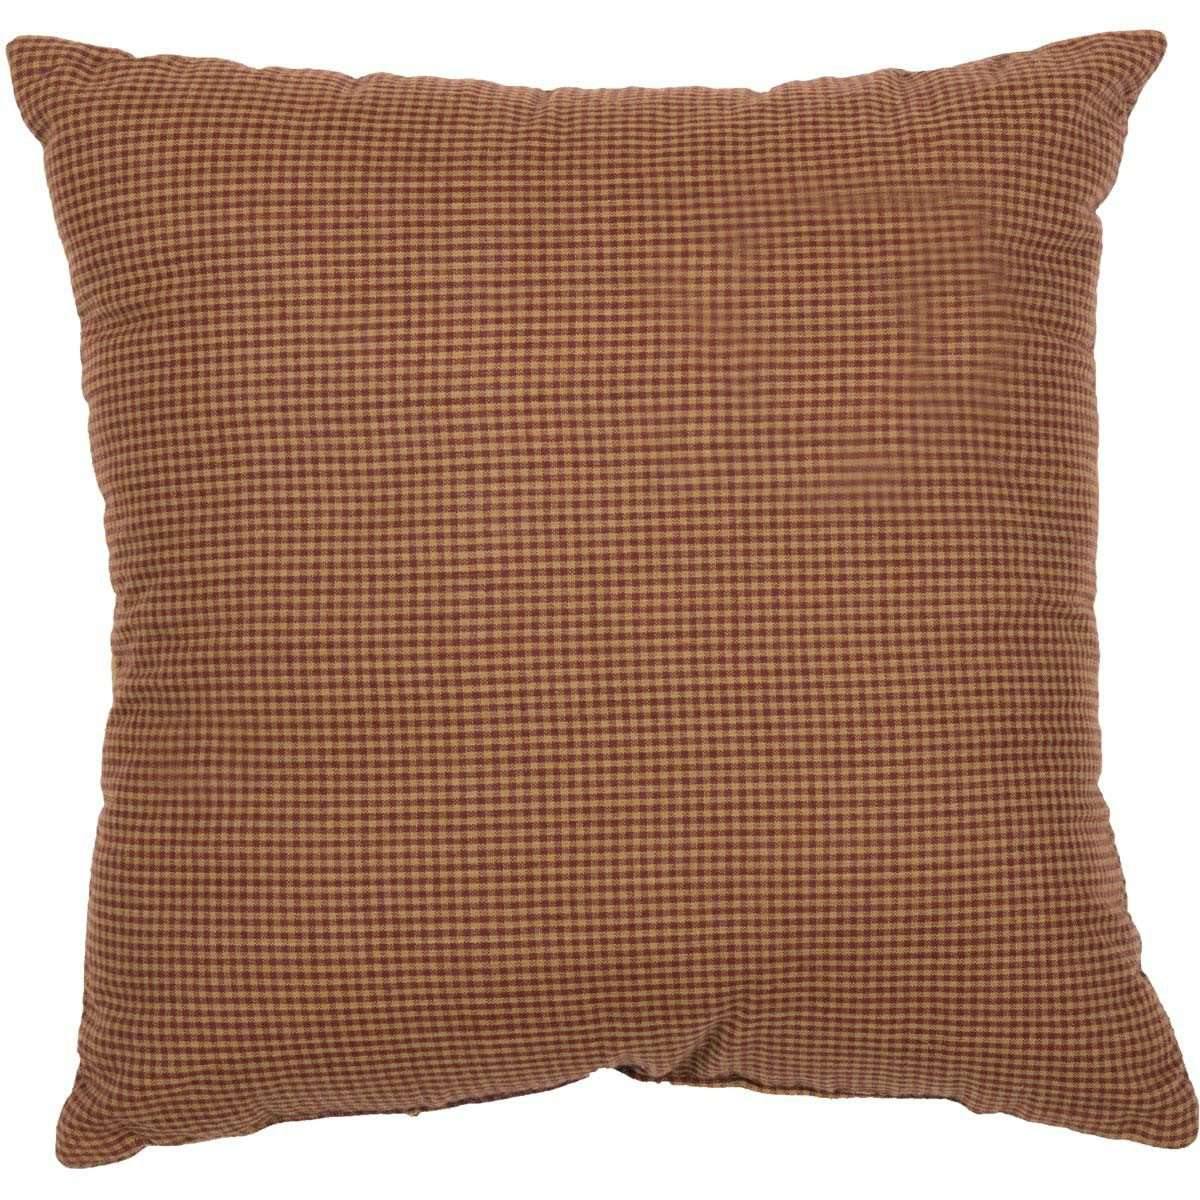 Heritage Farms Family Pillow 12x12 VHC Brands back